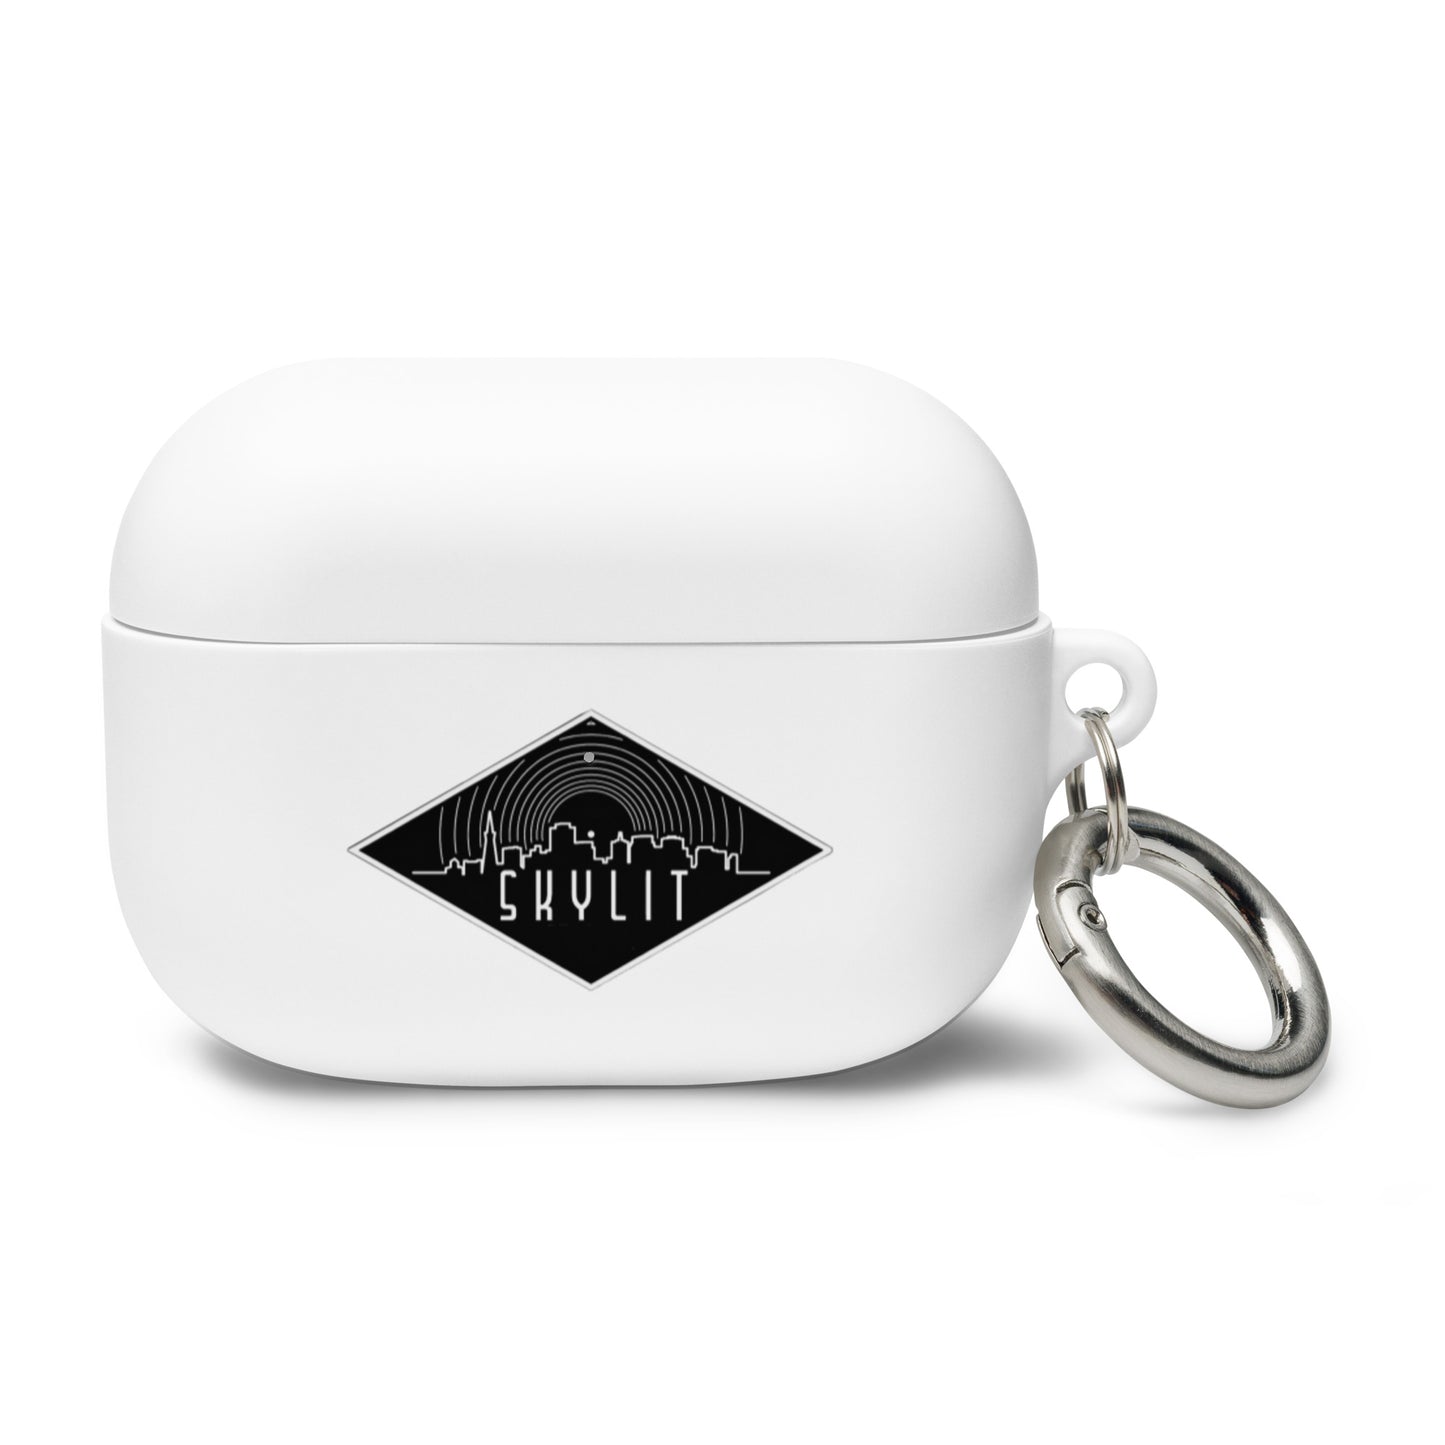 Skylit AirPods case